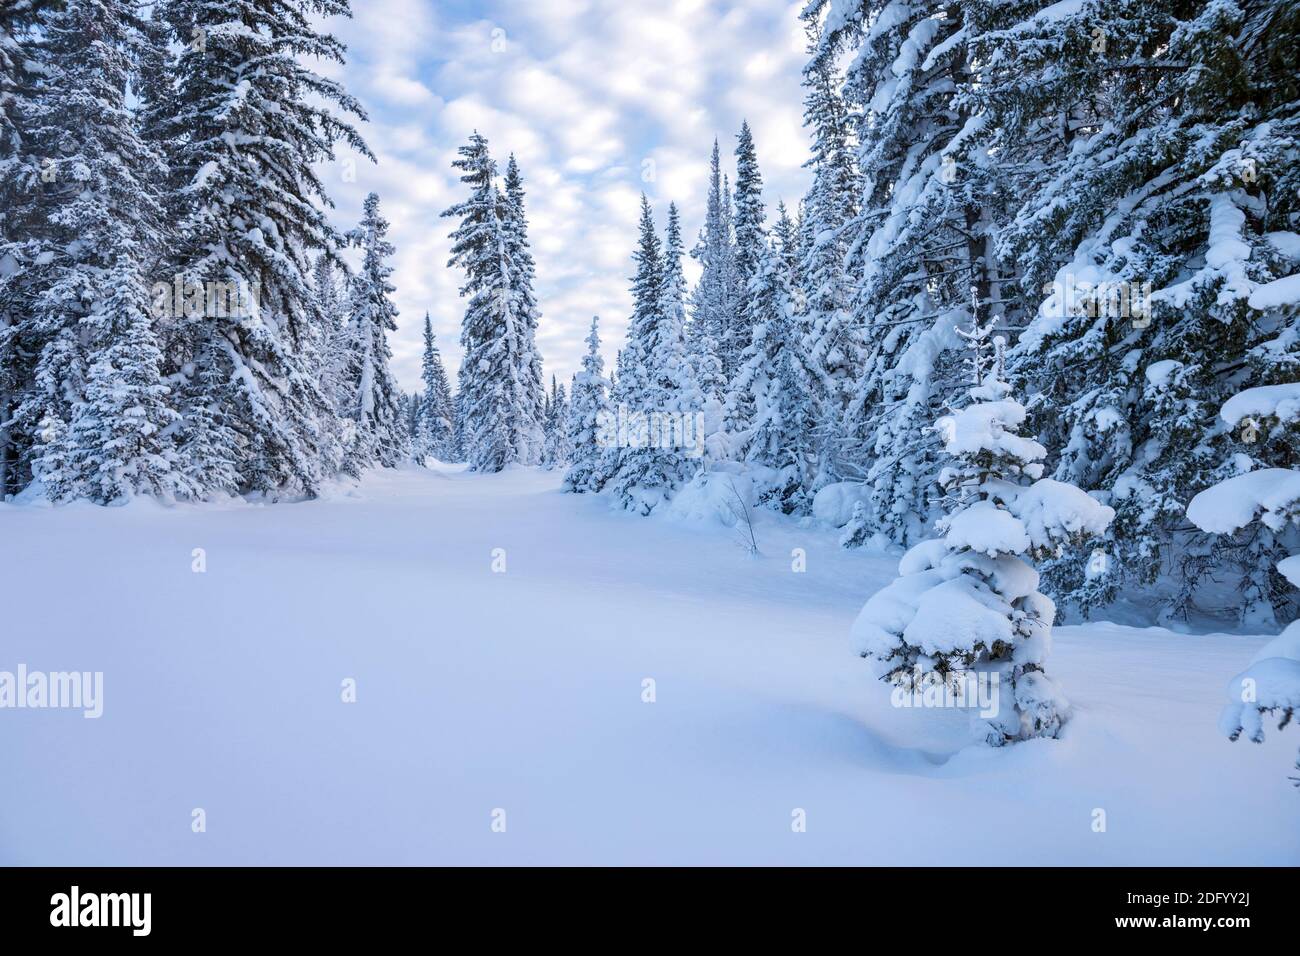 Winter landscape with fir trees in the snow and a beautiful sky. Stock Photo